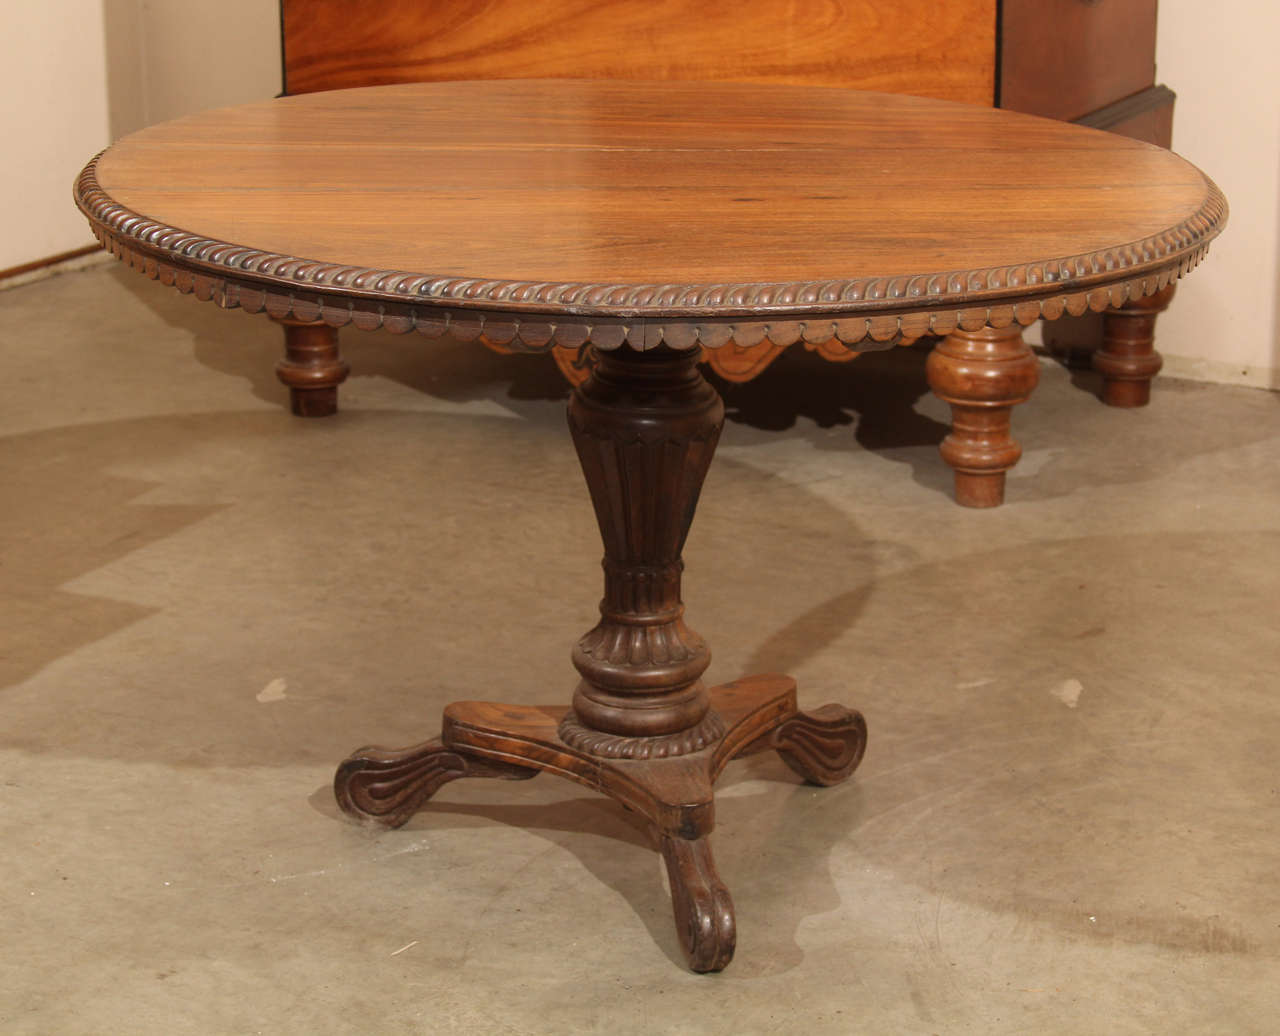 A Ceylonese round paldao wood tilt-top on tripod base in the Dutch colonial taste, circa 1850.